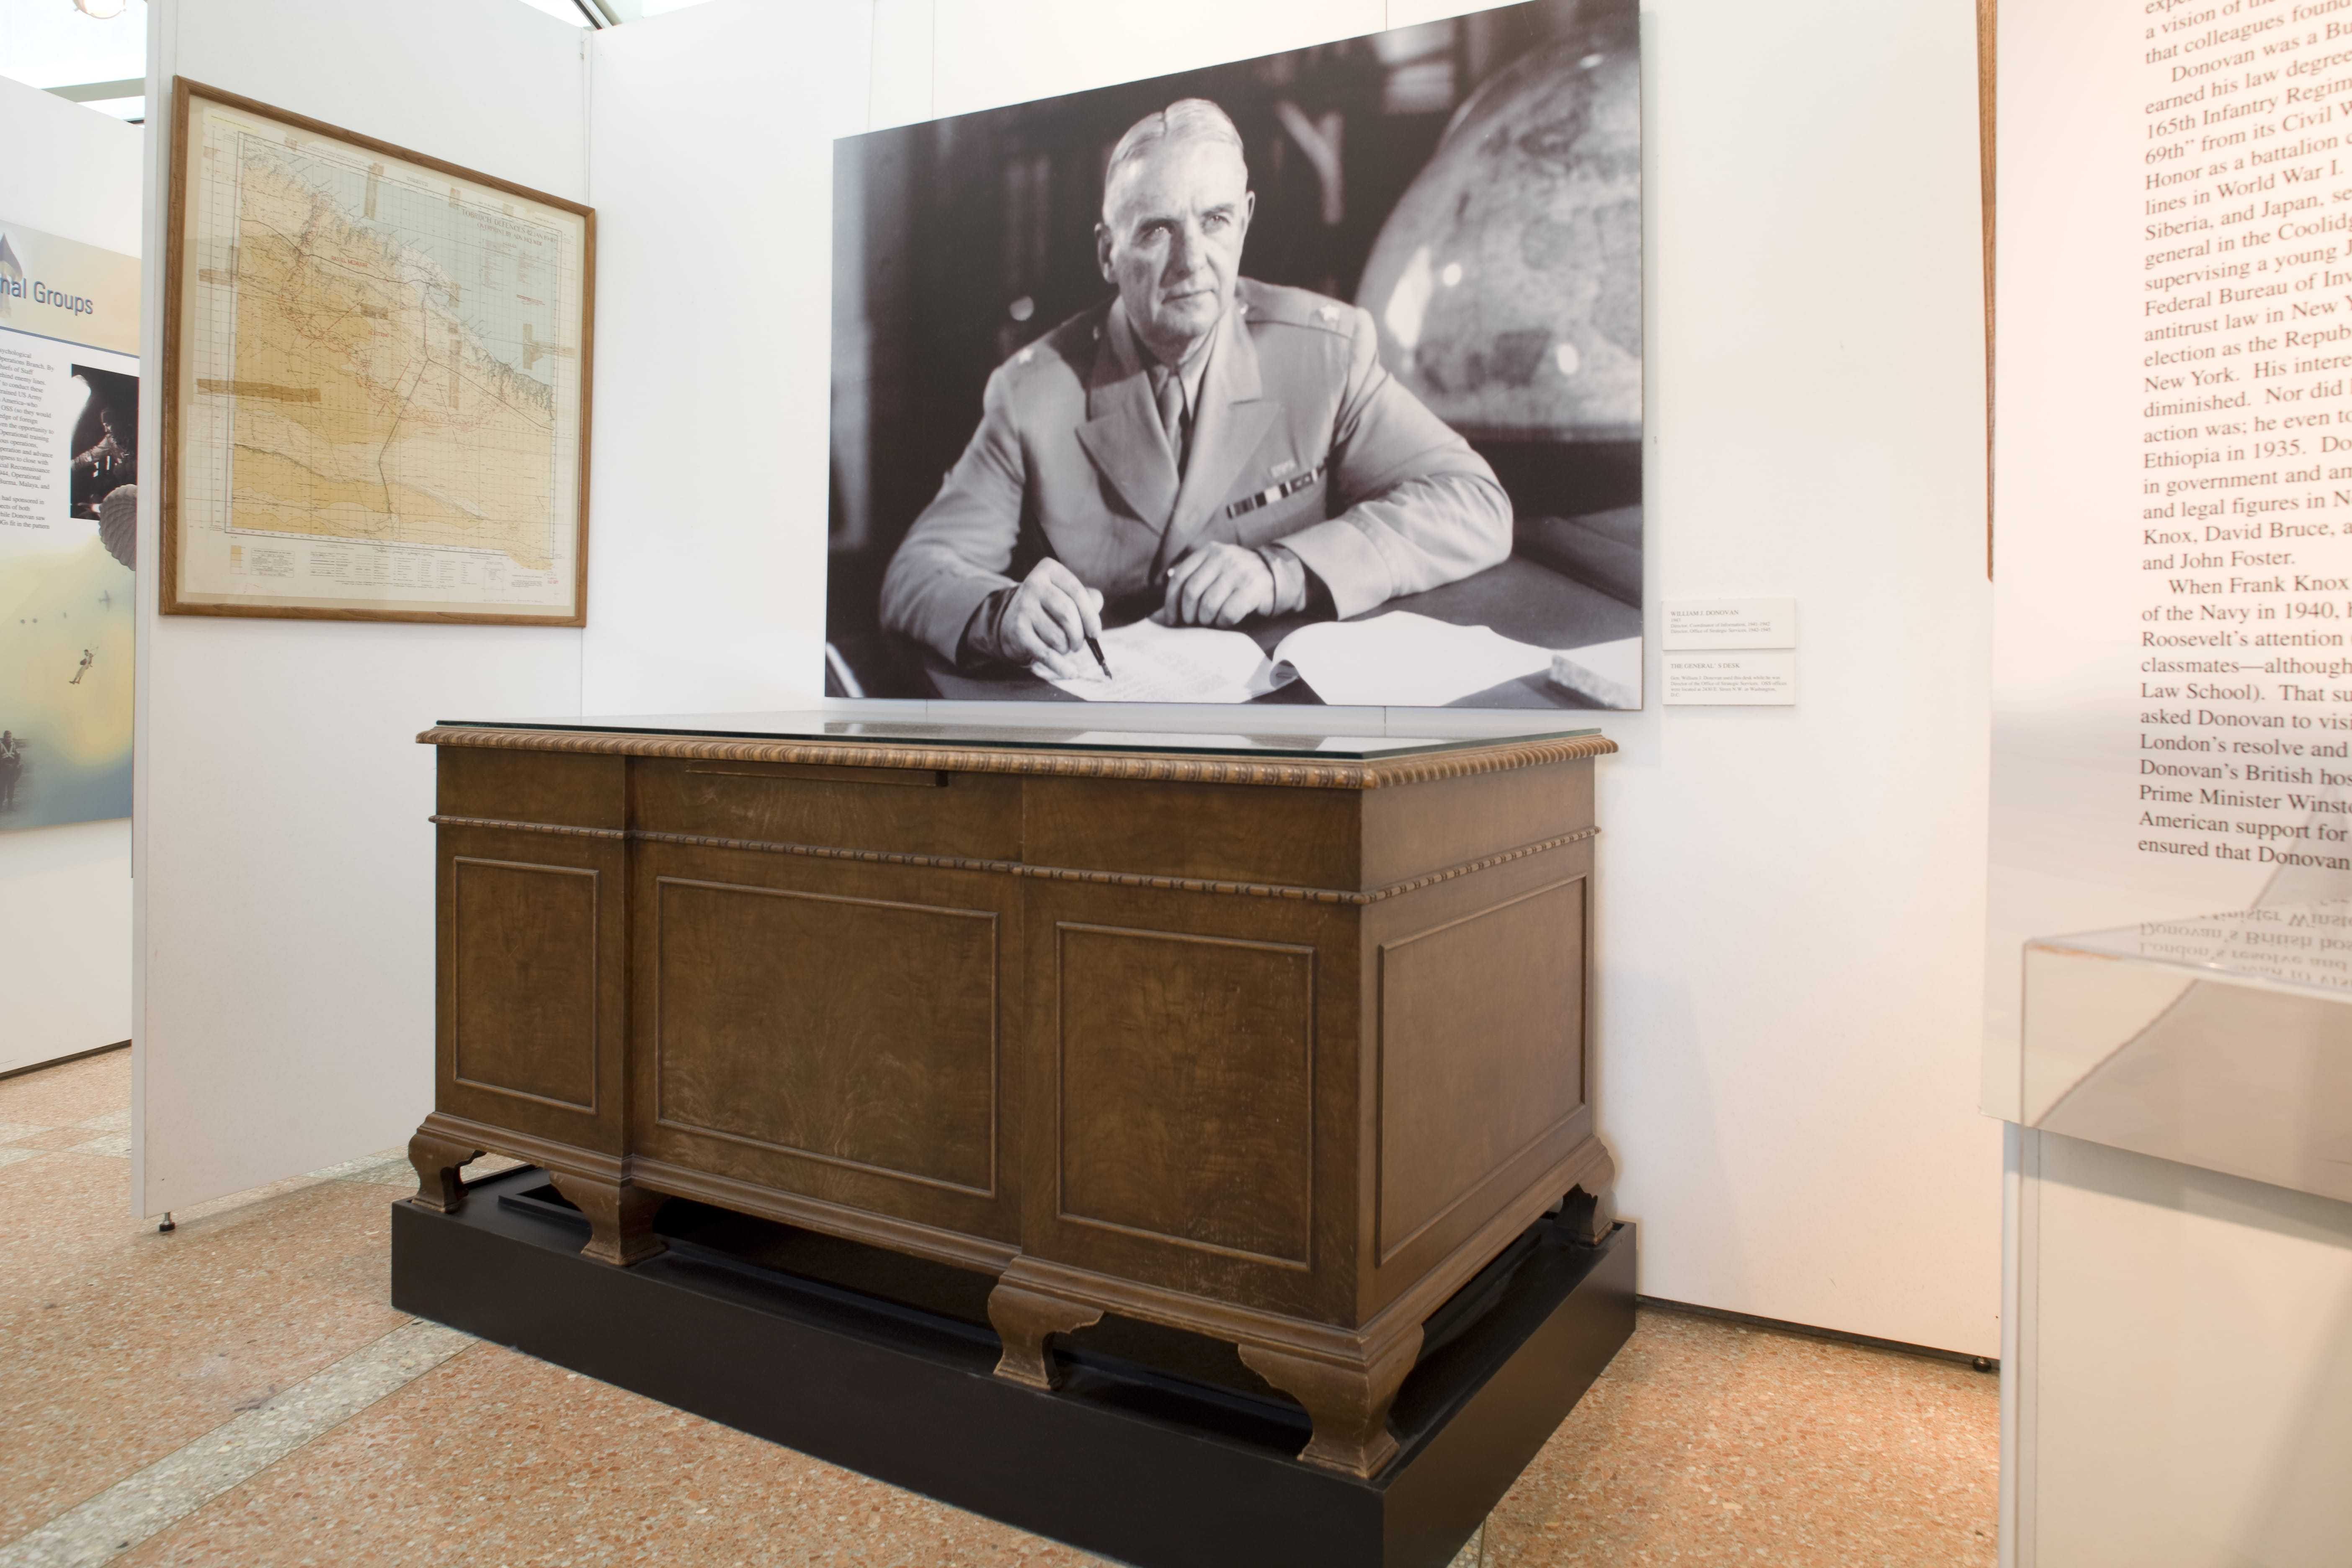 A large wooden desk with a glass top in front of a poster of William J Donovan